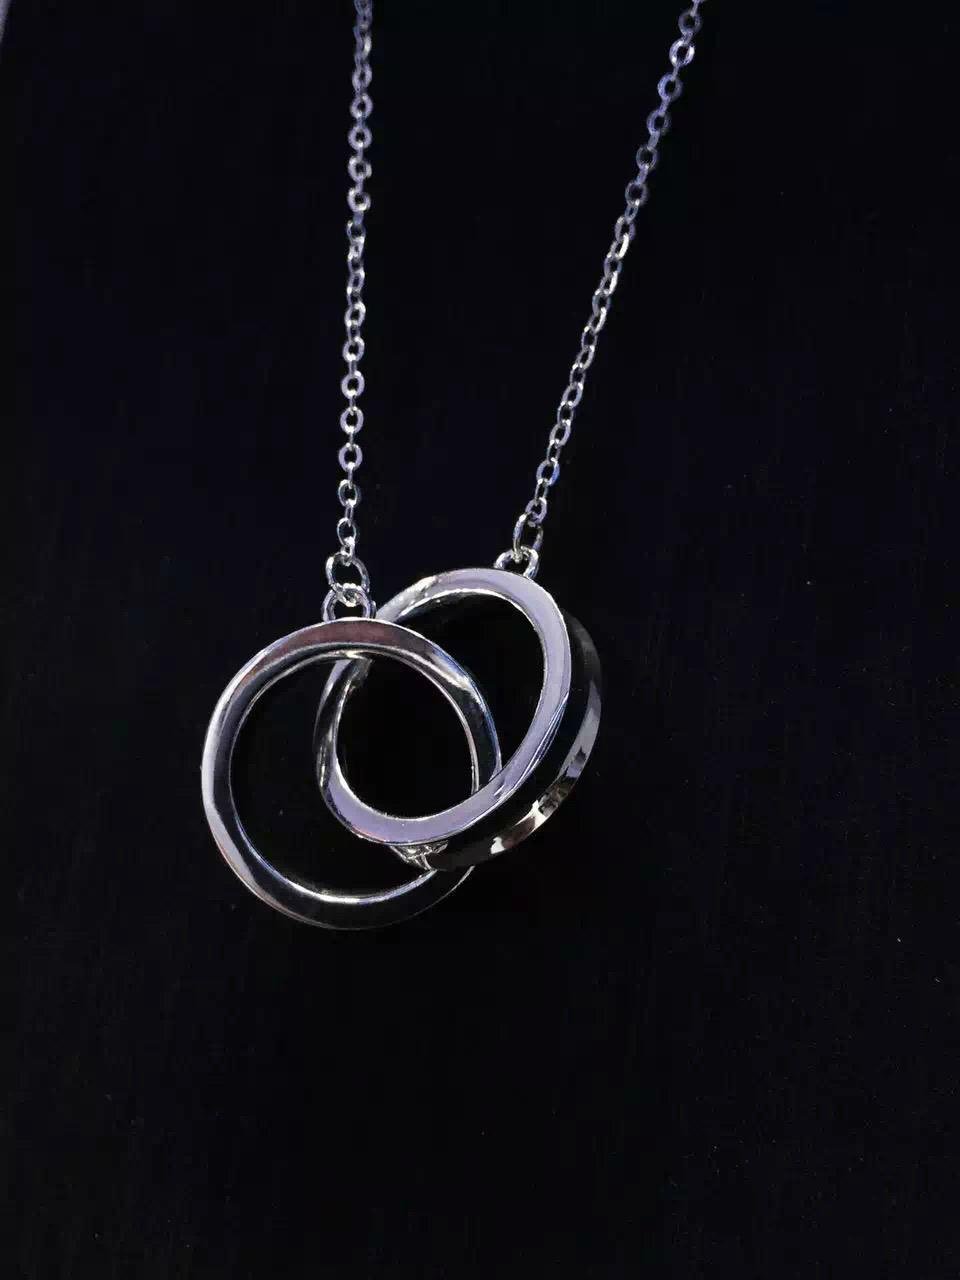 NEFFLY 925 silver Double loop high-grade PENDANT NECKLACE free shipping 2